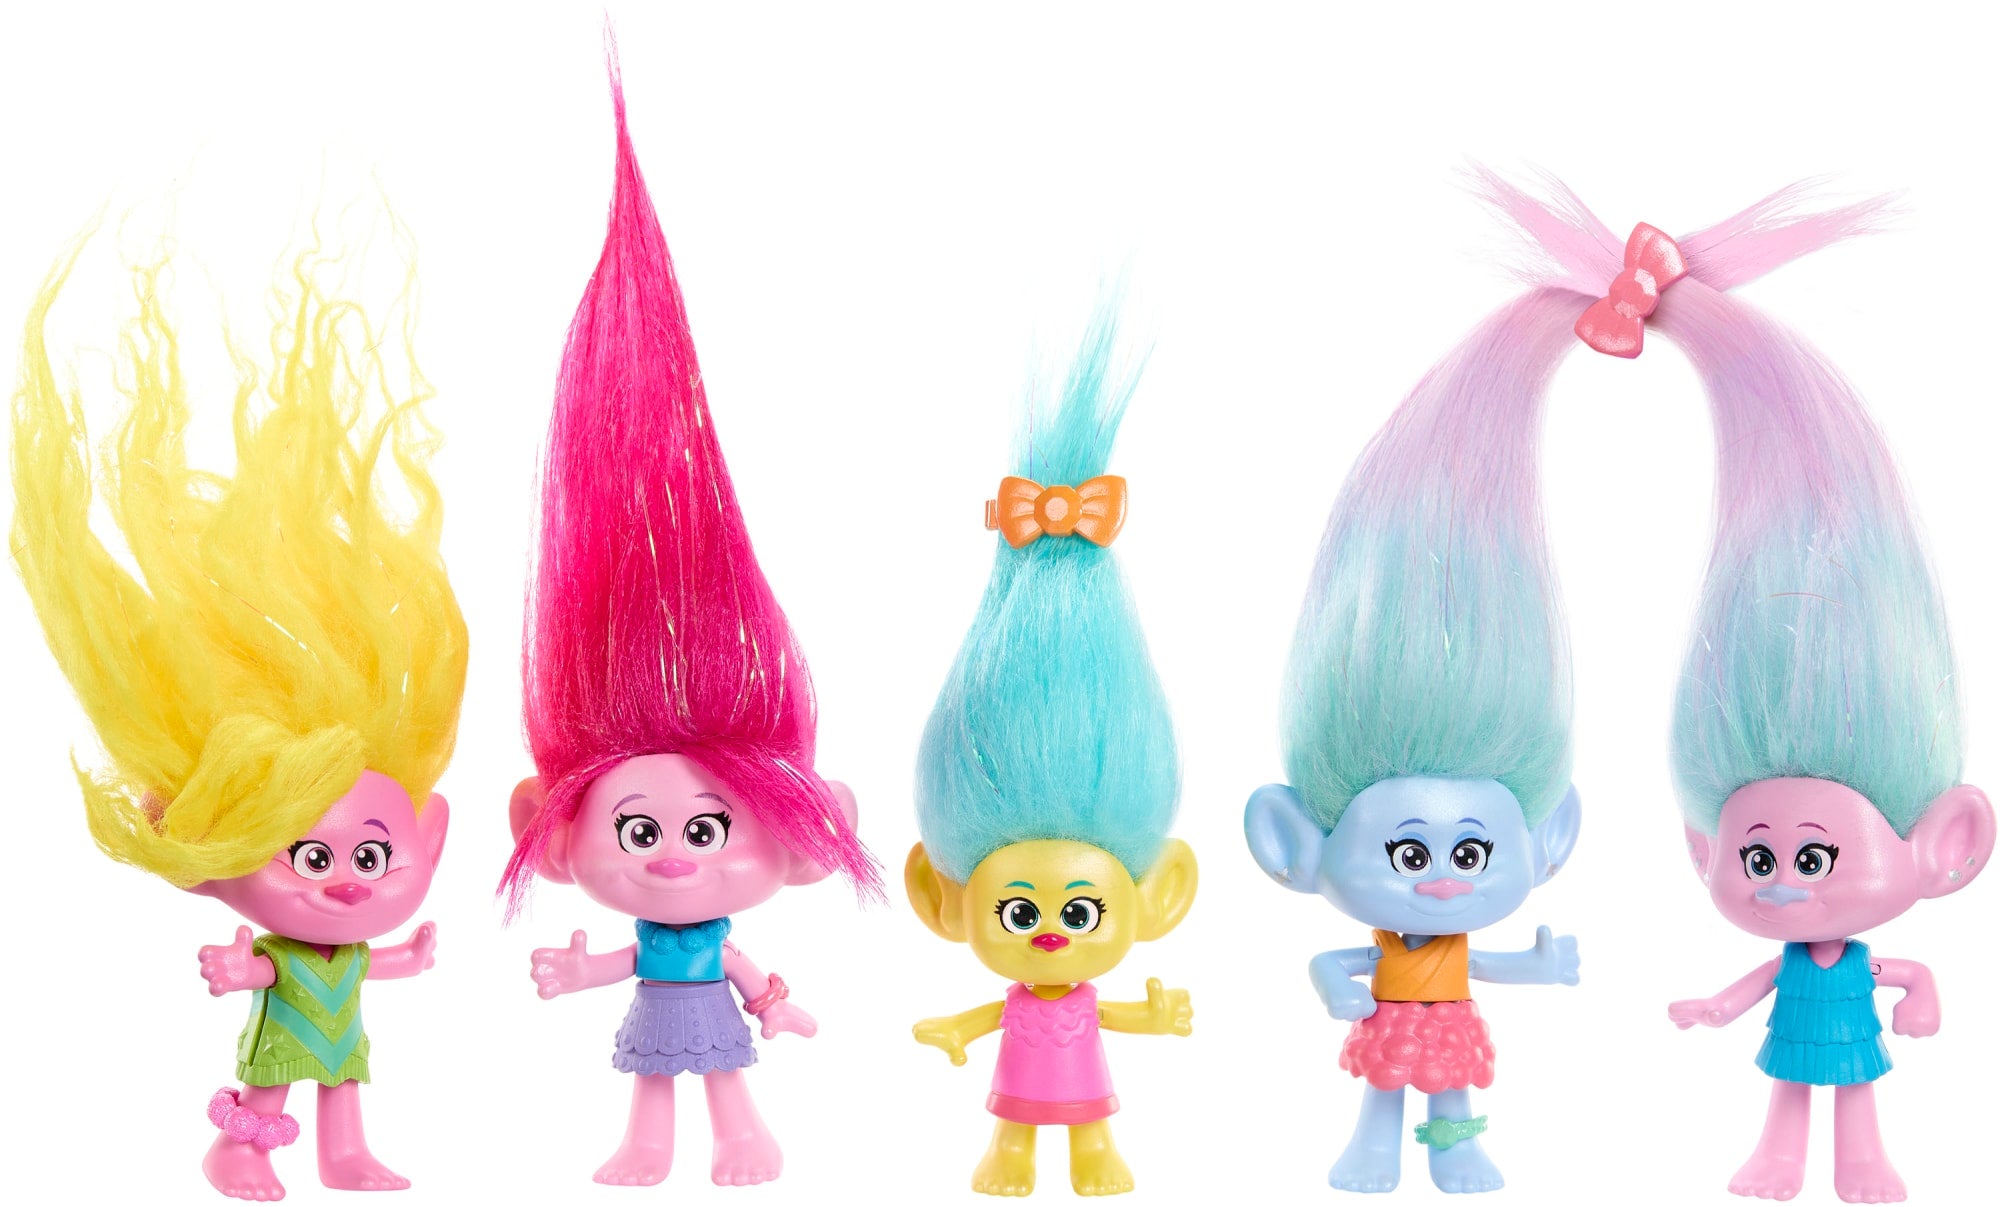 Mini Troll Doll Party Favors - 12 Pack!